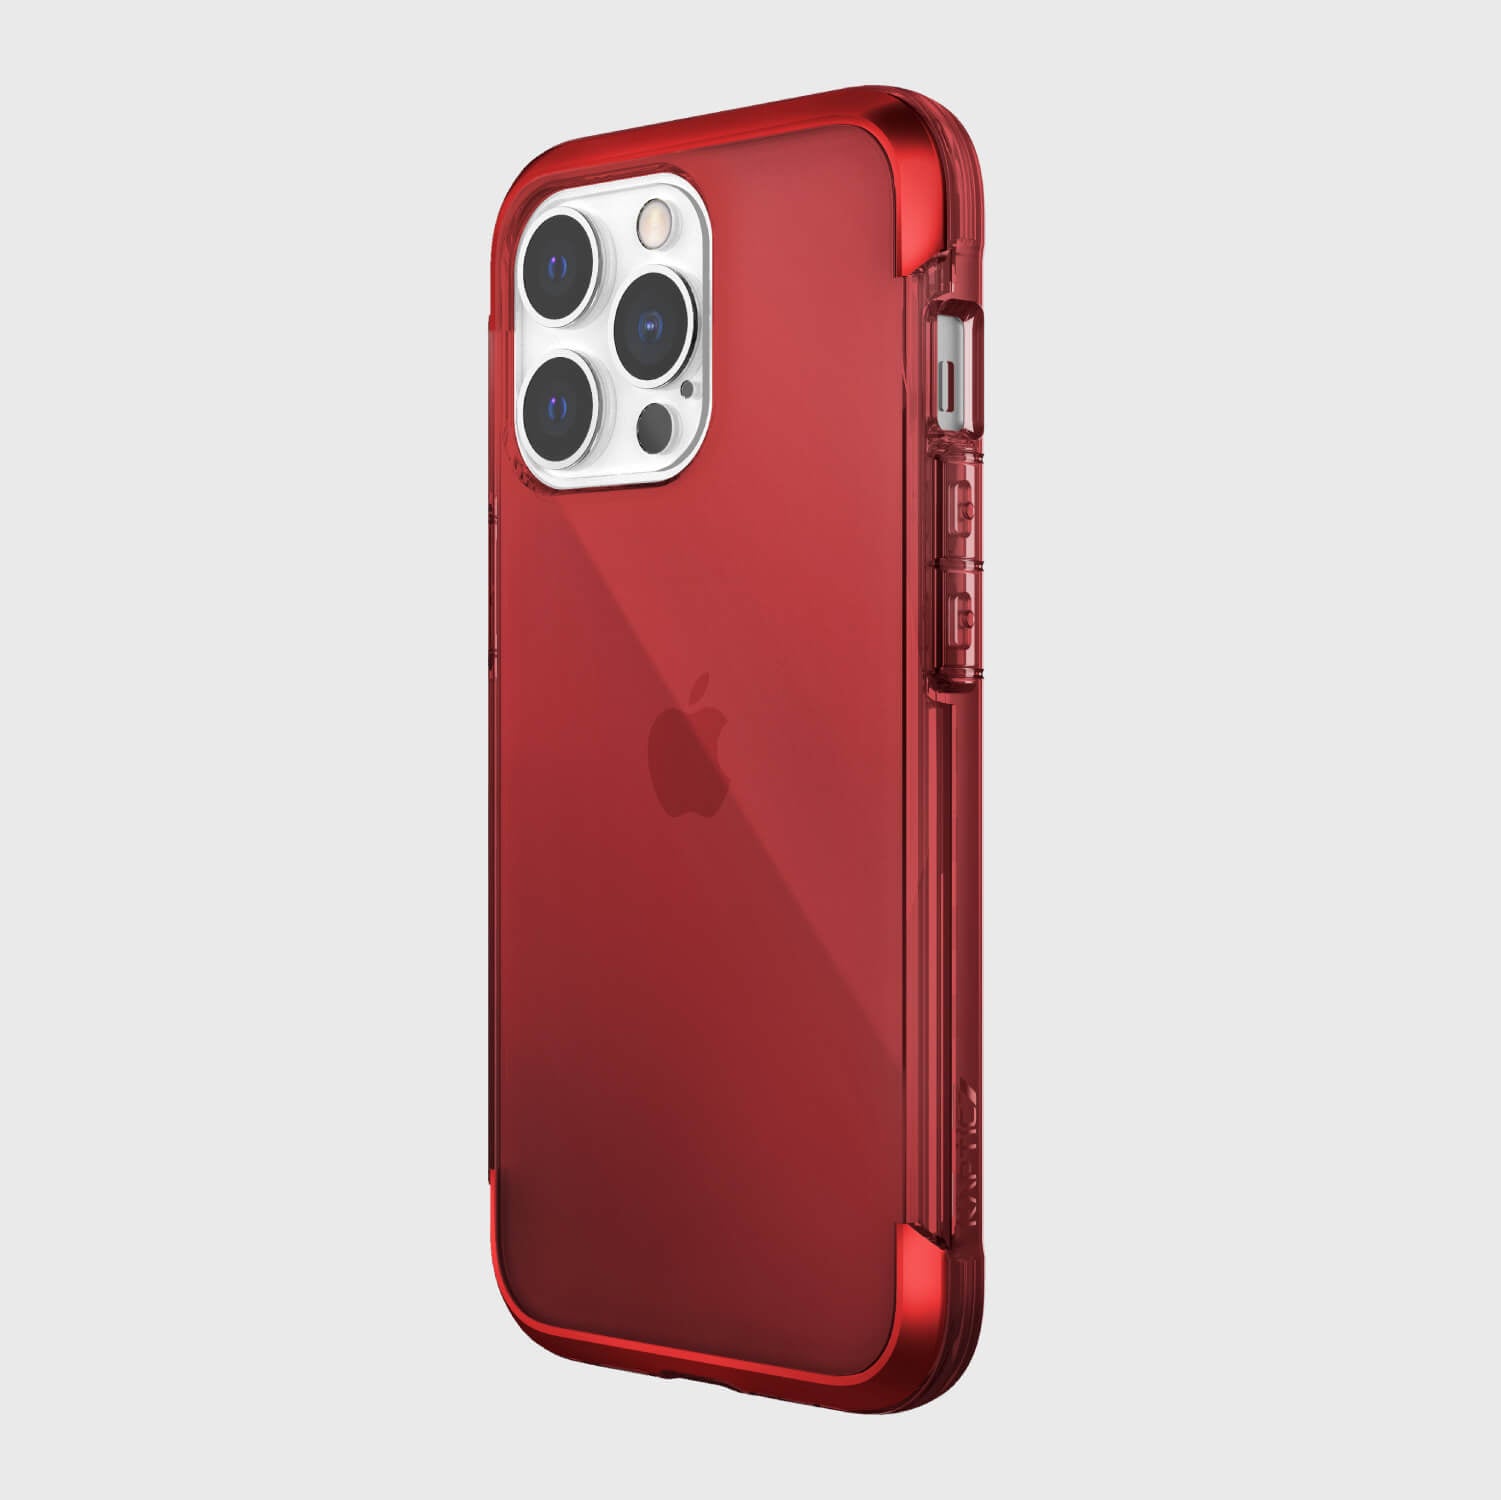 A red Raptic iPhone 13 Pro Case - AIR with drop proof and multiple cameras.